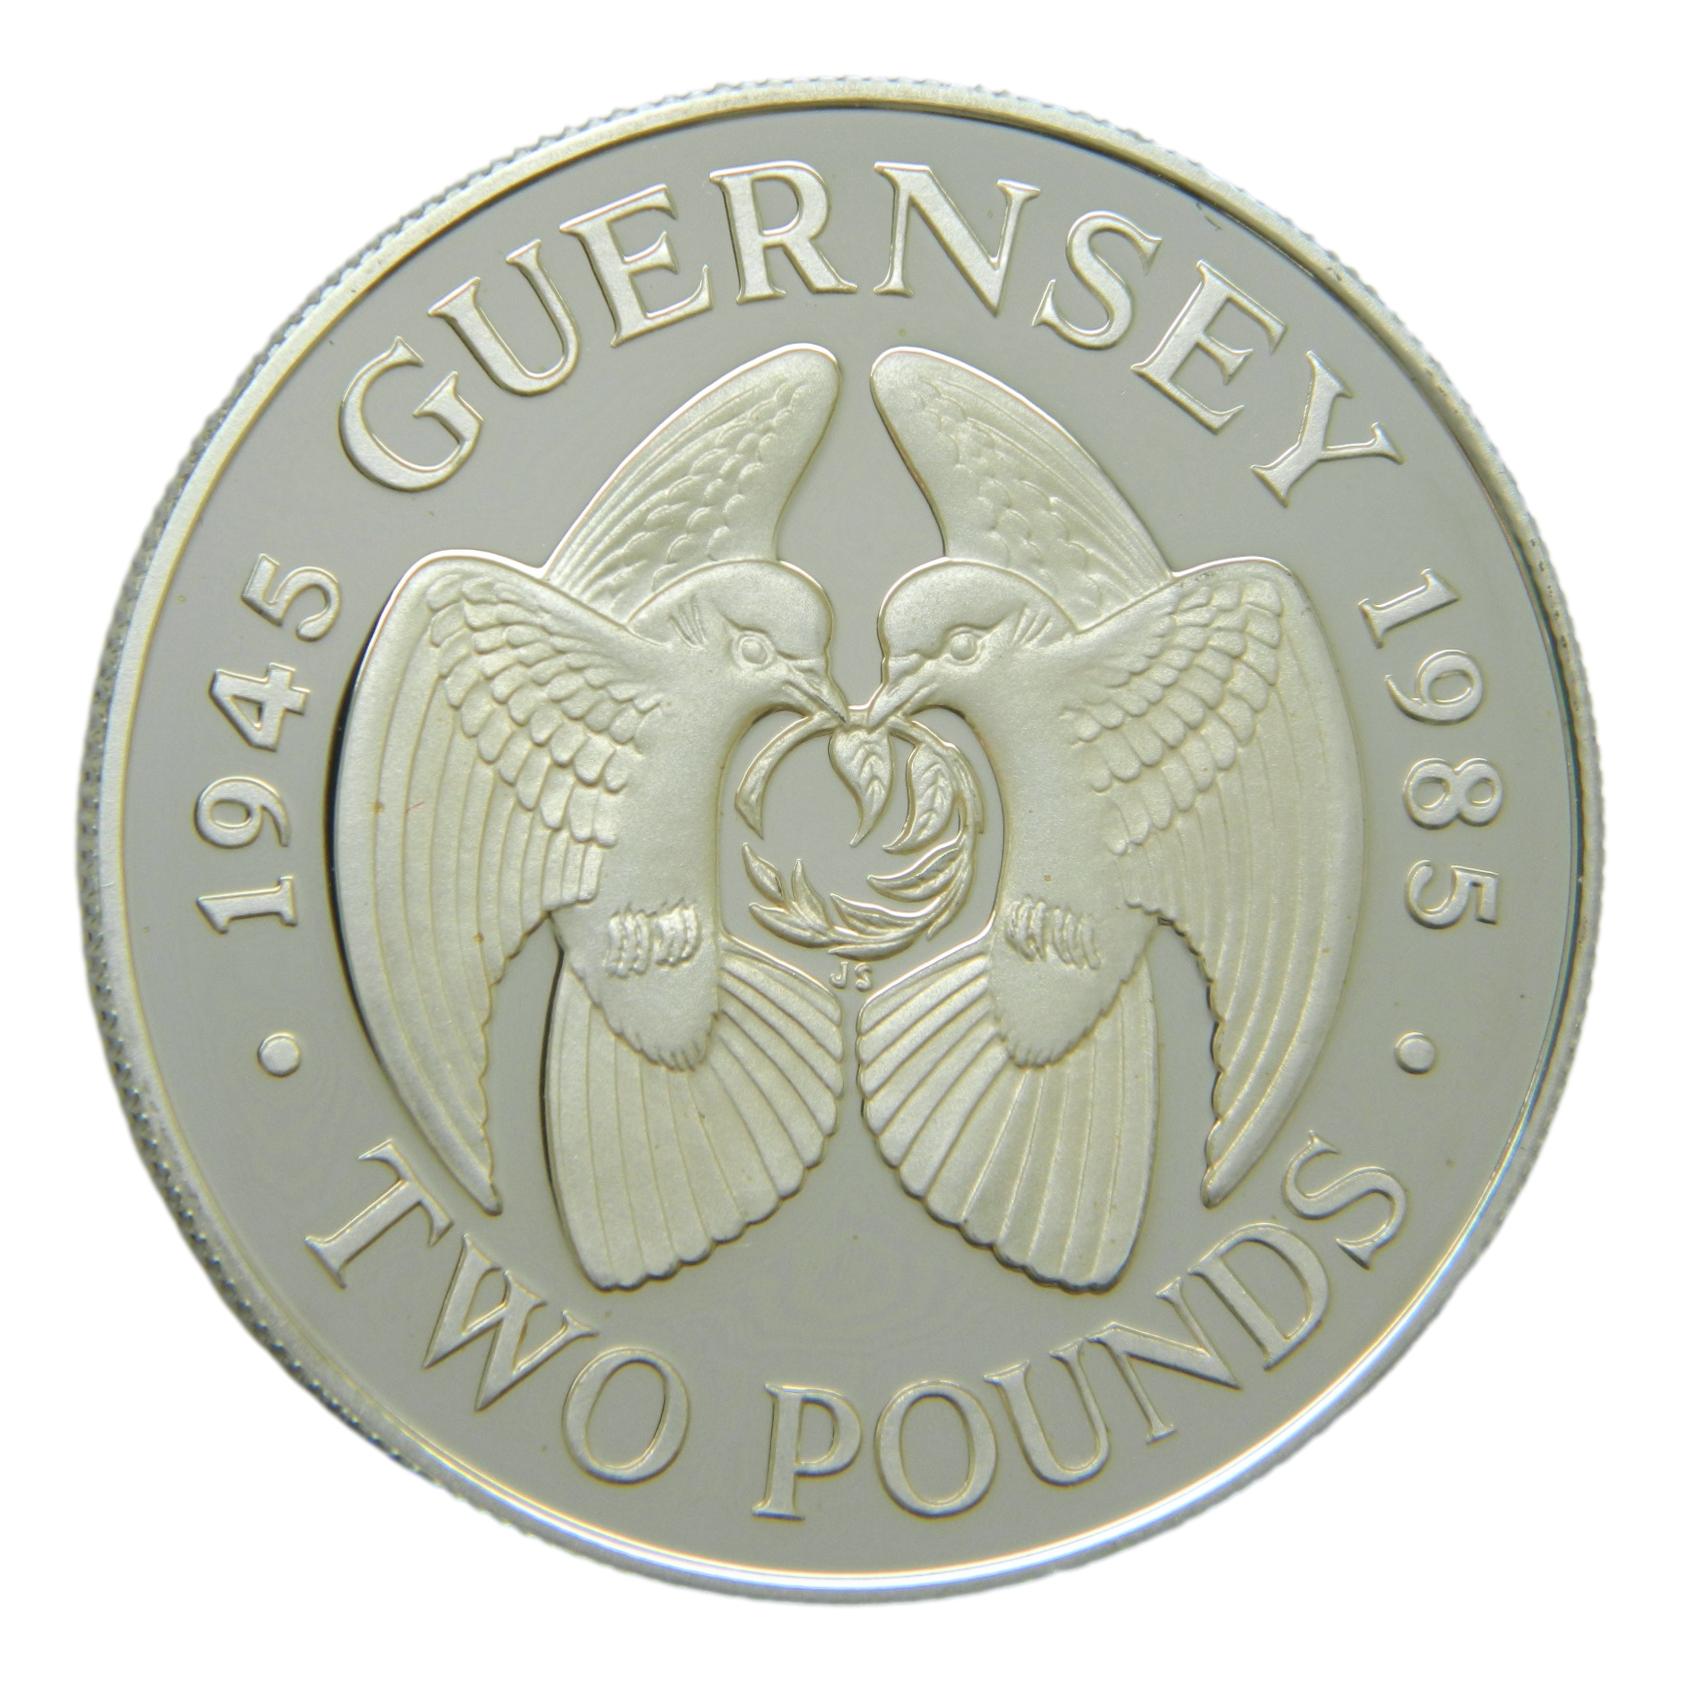 1985 - GUERNSEY - 2 POUNDS - ISABEL II - PROOF - S6